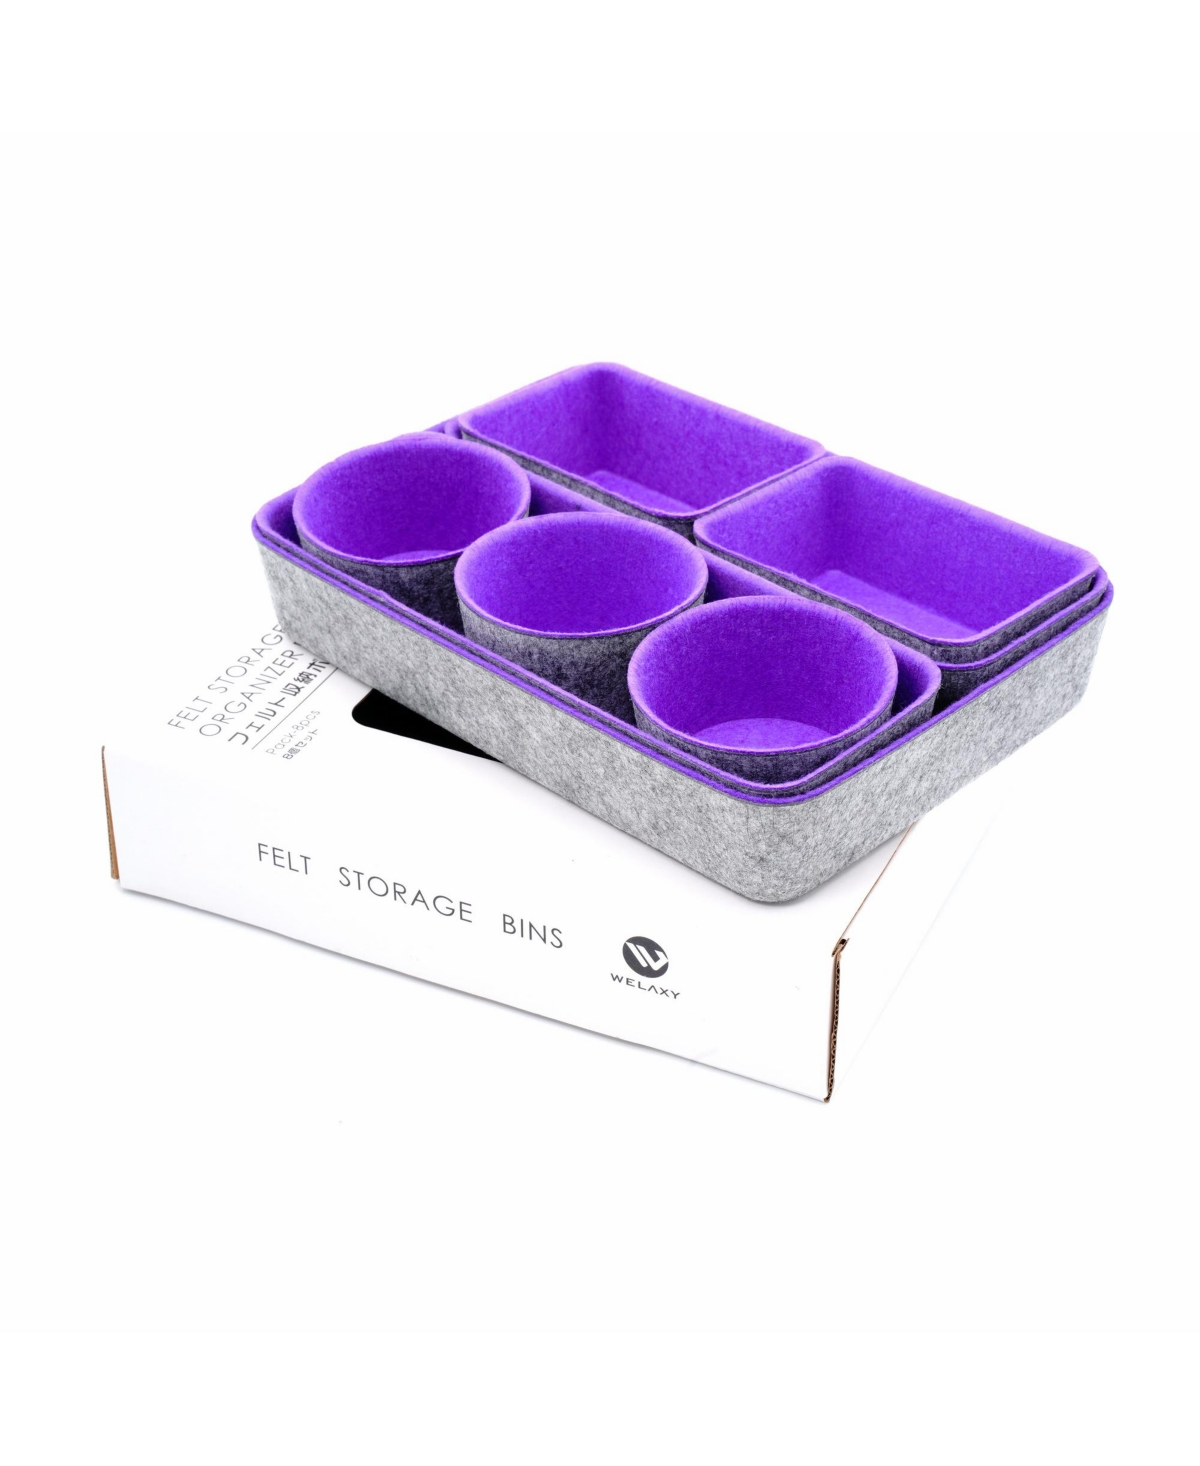 Welaxy 8 Piece Felt Drawer Organizer Set With Round Cups And Trays In Purple